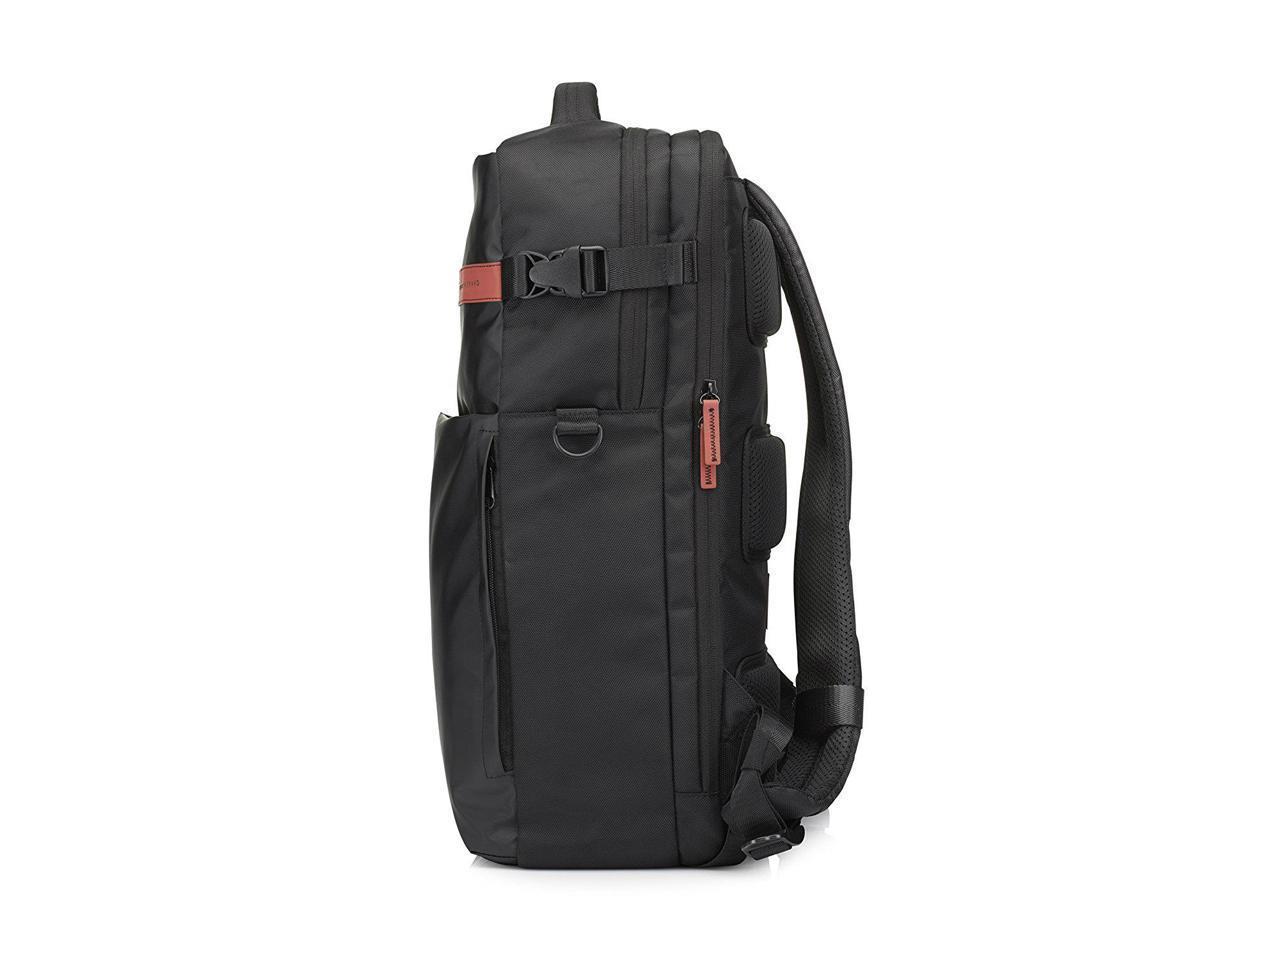 HP Carrying Case (Backpack) for 17.3